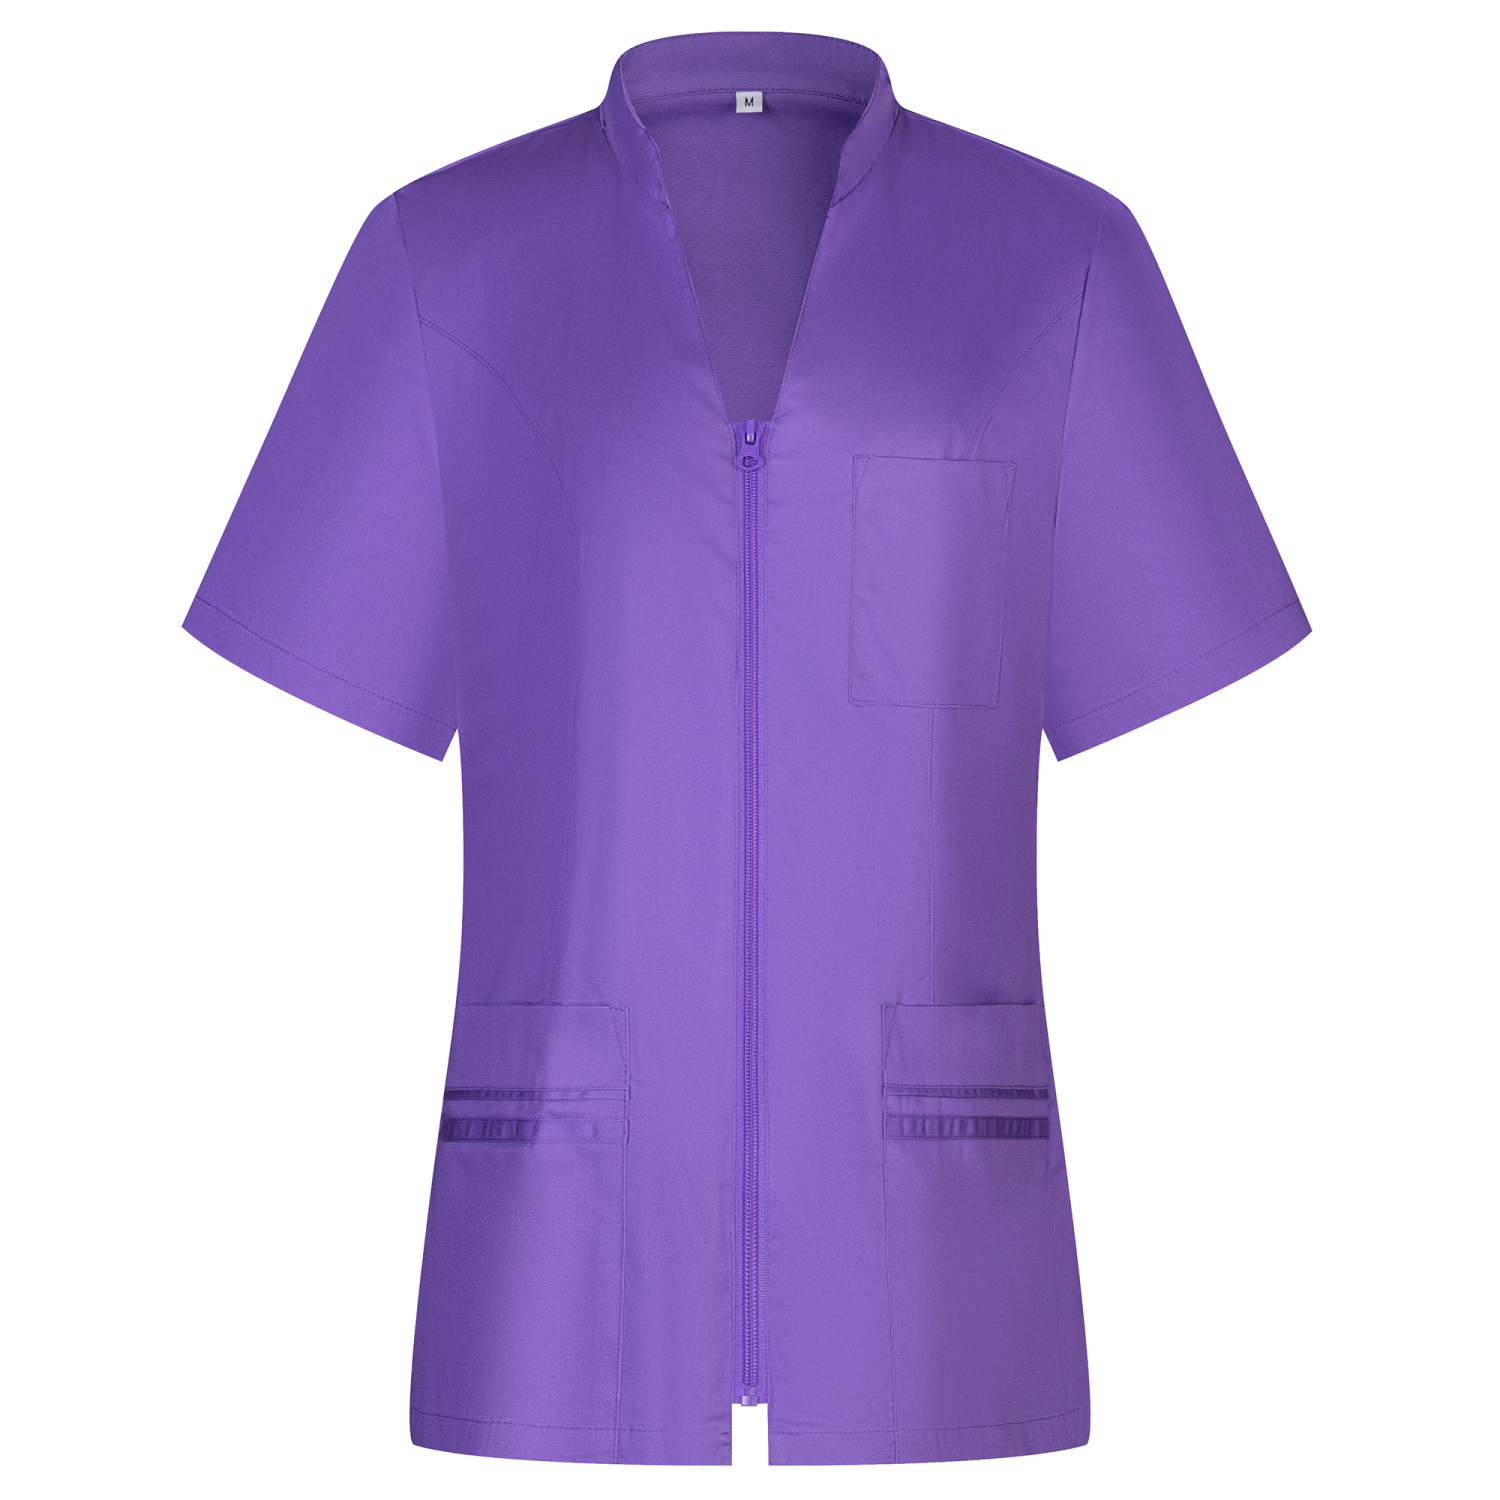 WORK CLOTHES LADY SHORT SLEEVES Medical Uniforms Scrub Top - Ref.712